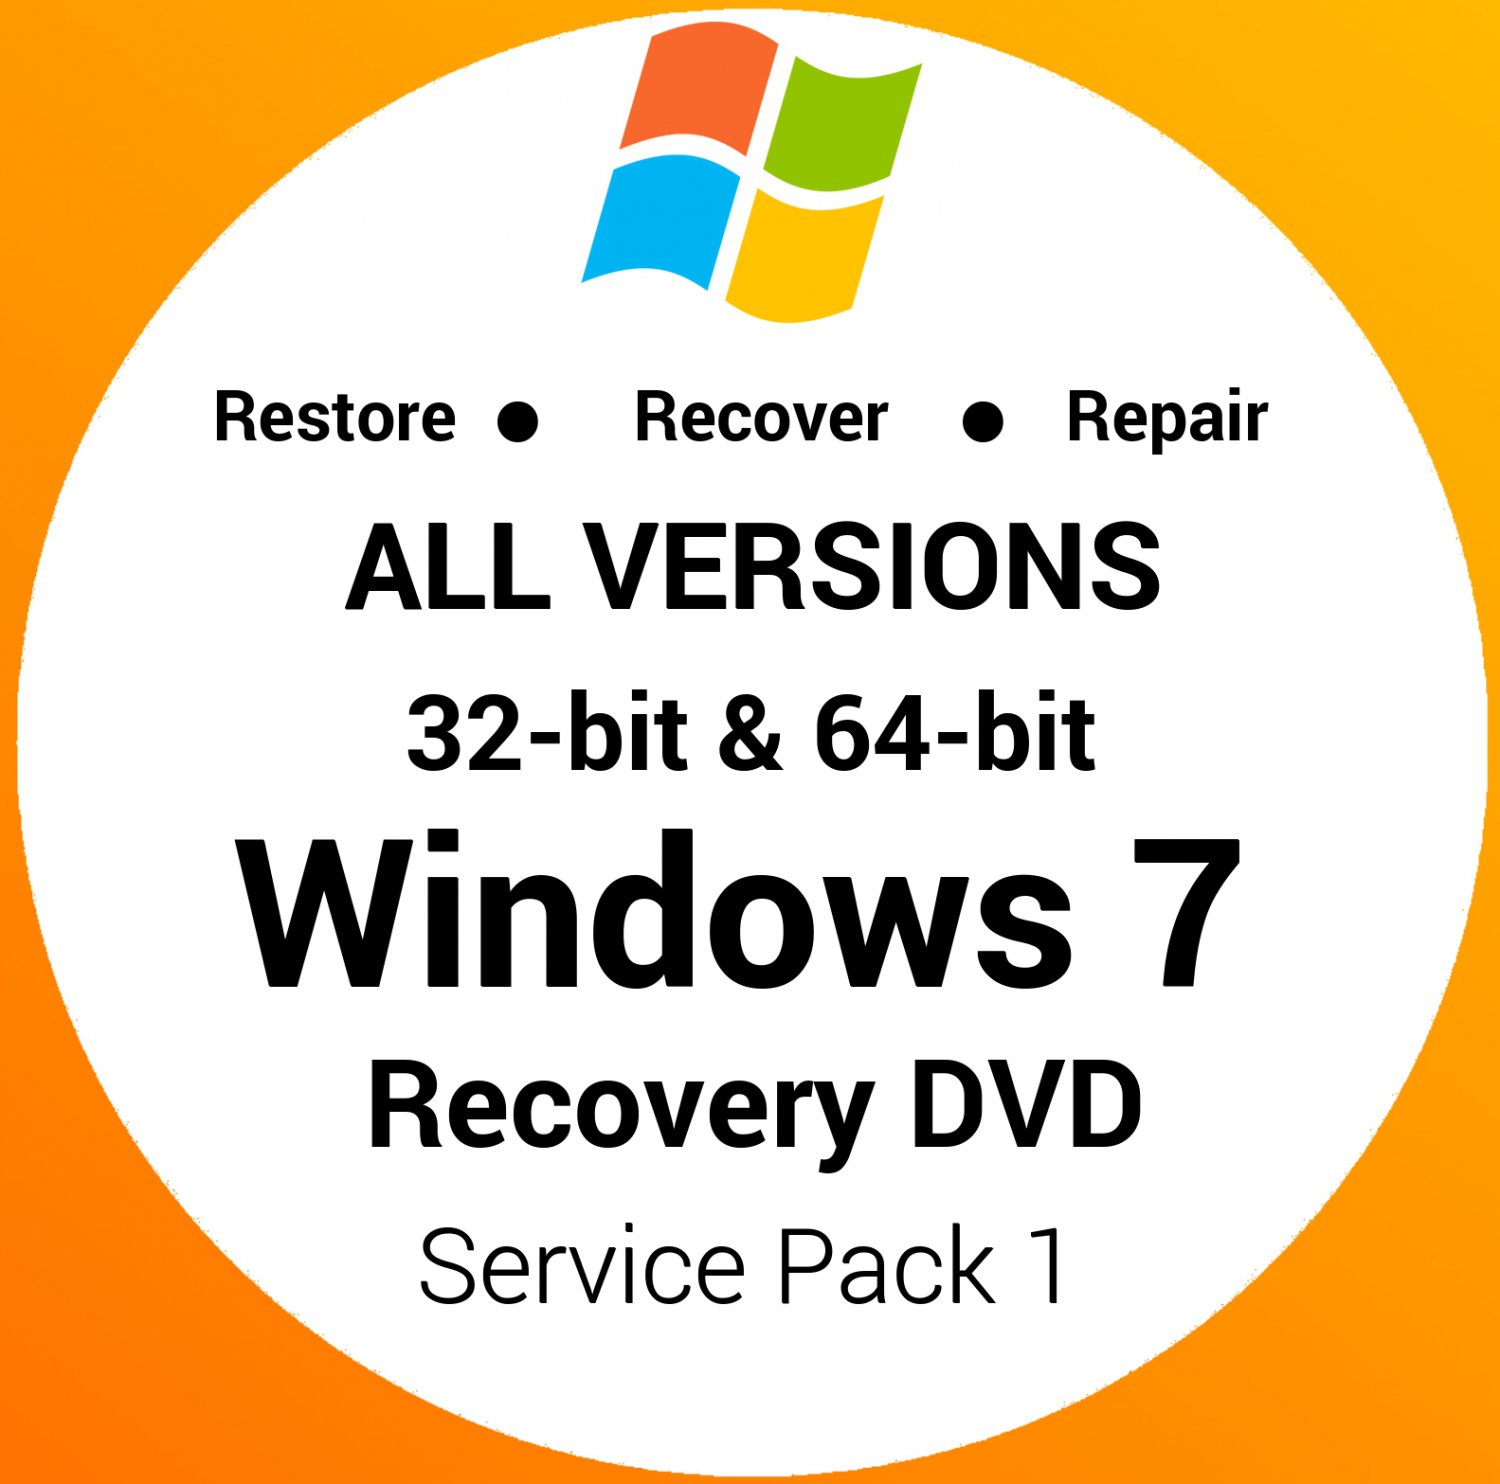 how to uninstall 32 bit and reinstall 64 bit office 365